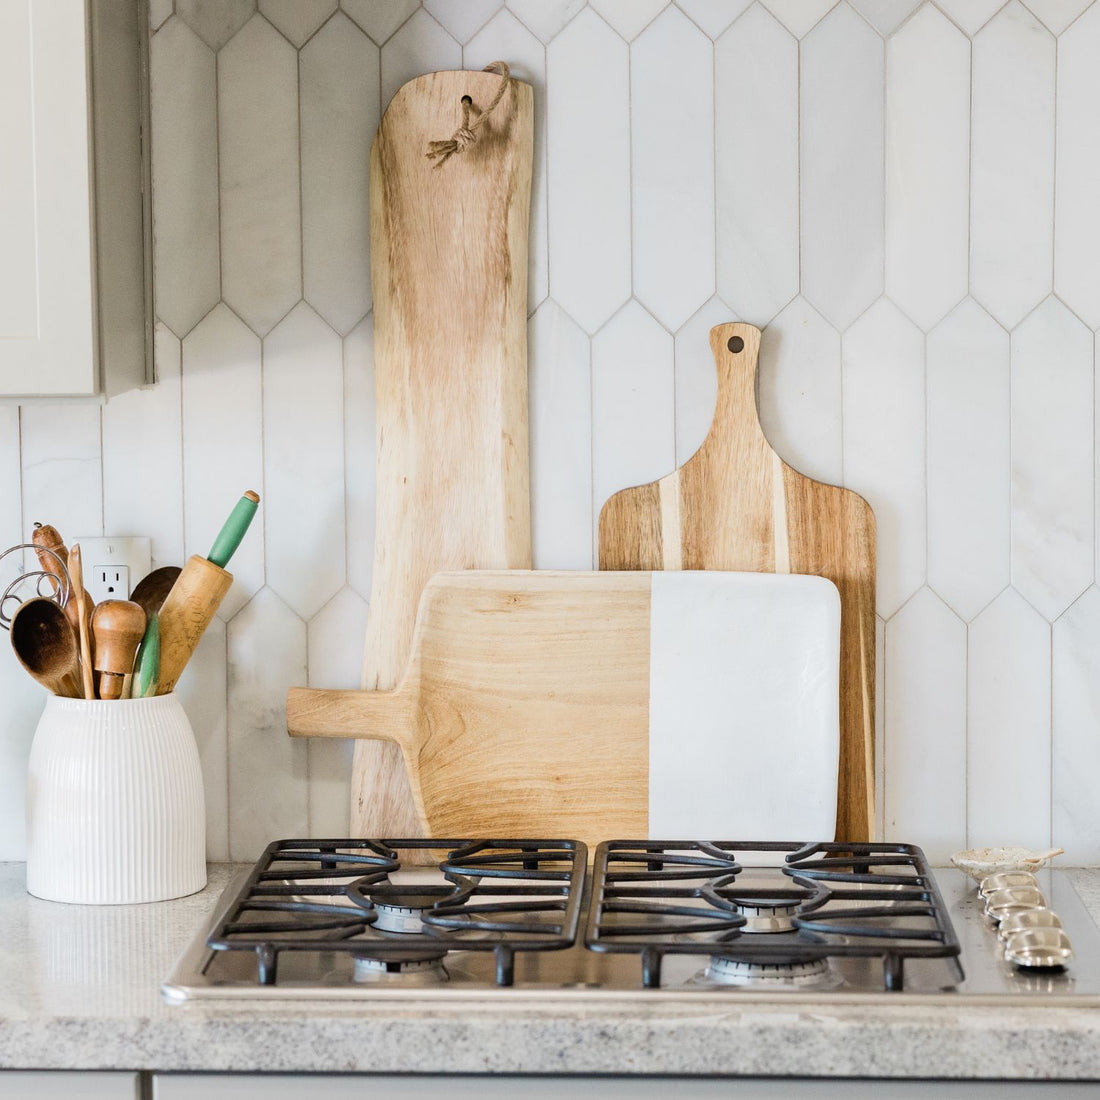 How to Display Cutting Boards on Kitchen Counter - Top 5 Ways